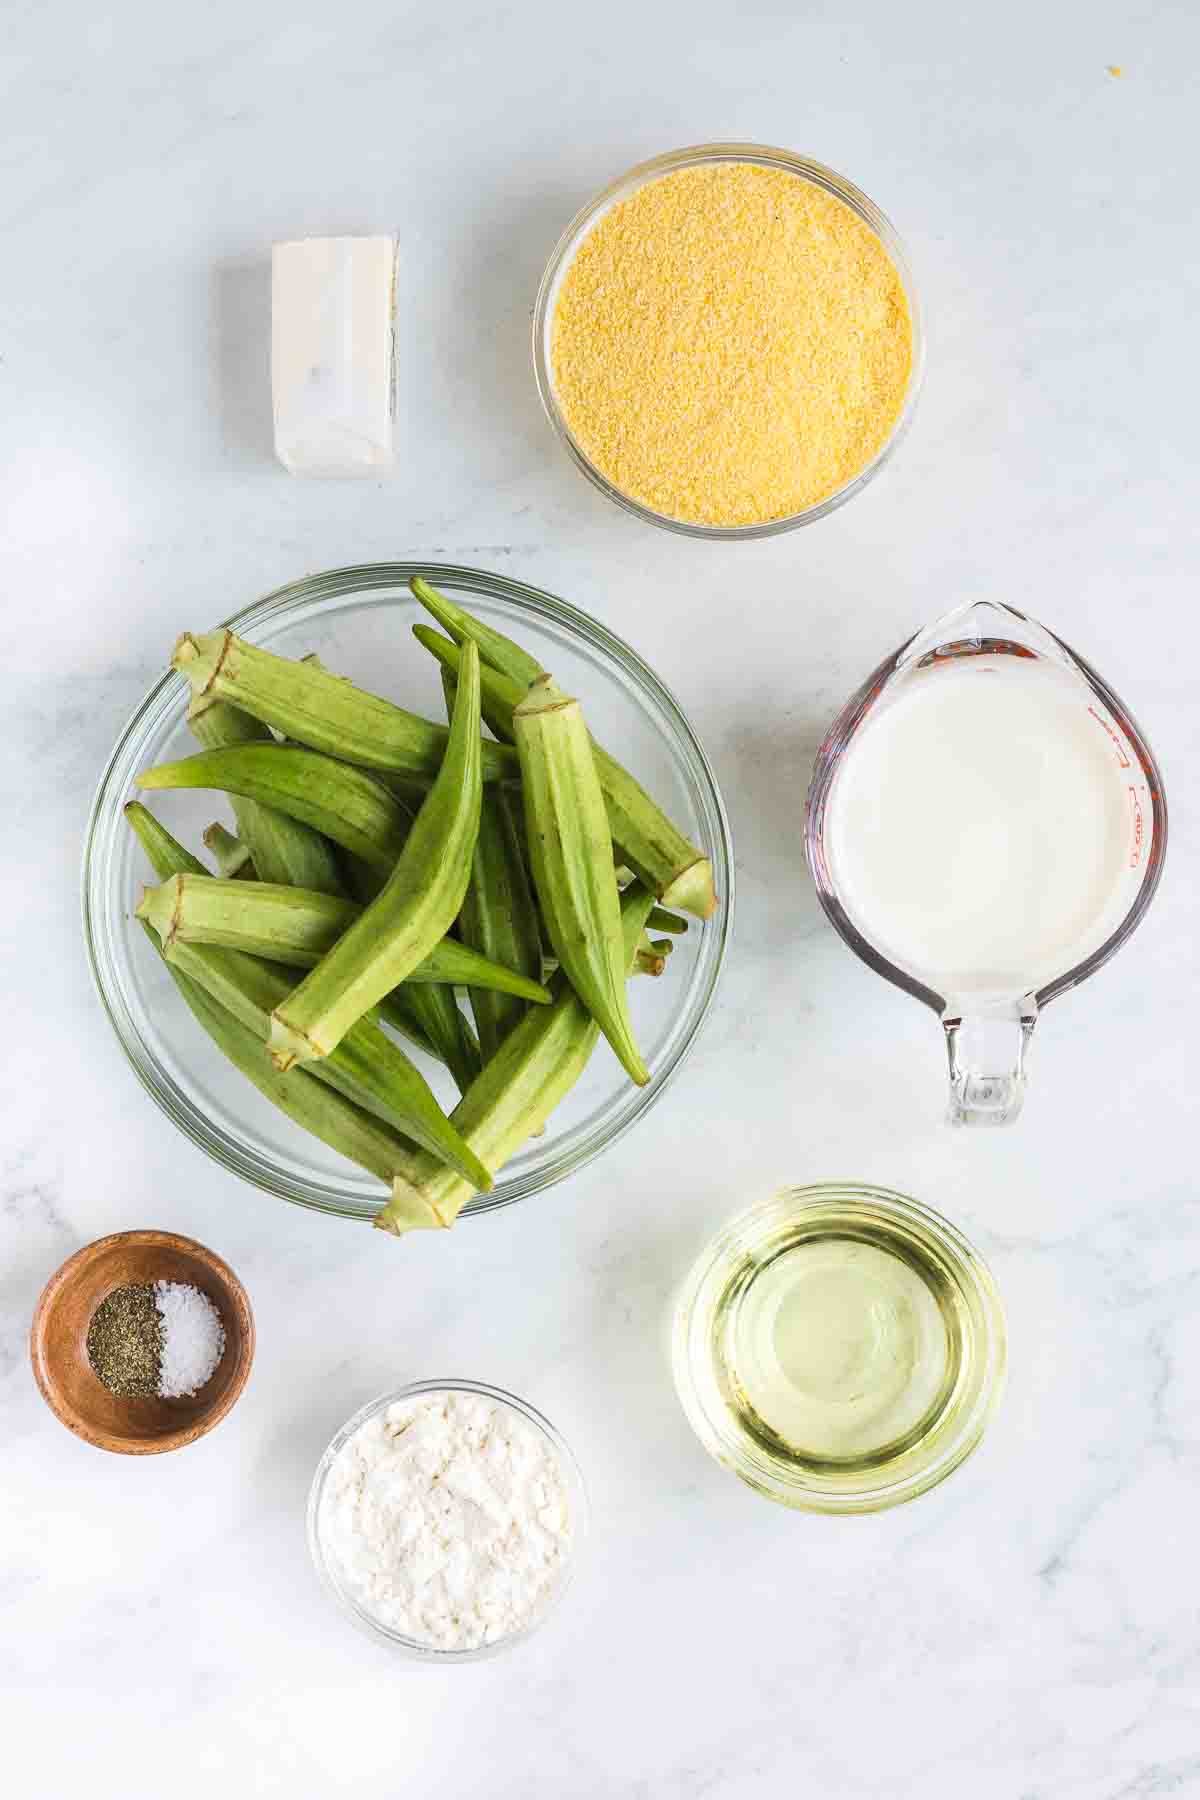 Top-down view of ingredients on a white surface including okra, milk, cornmeal, flour, cooking oil, butter, salt, and pepper.